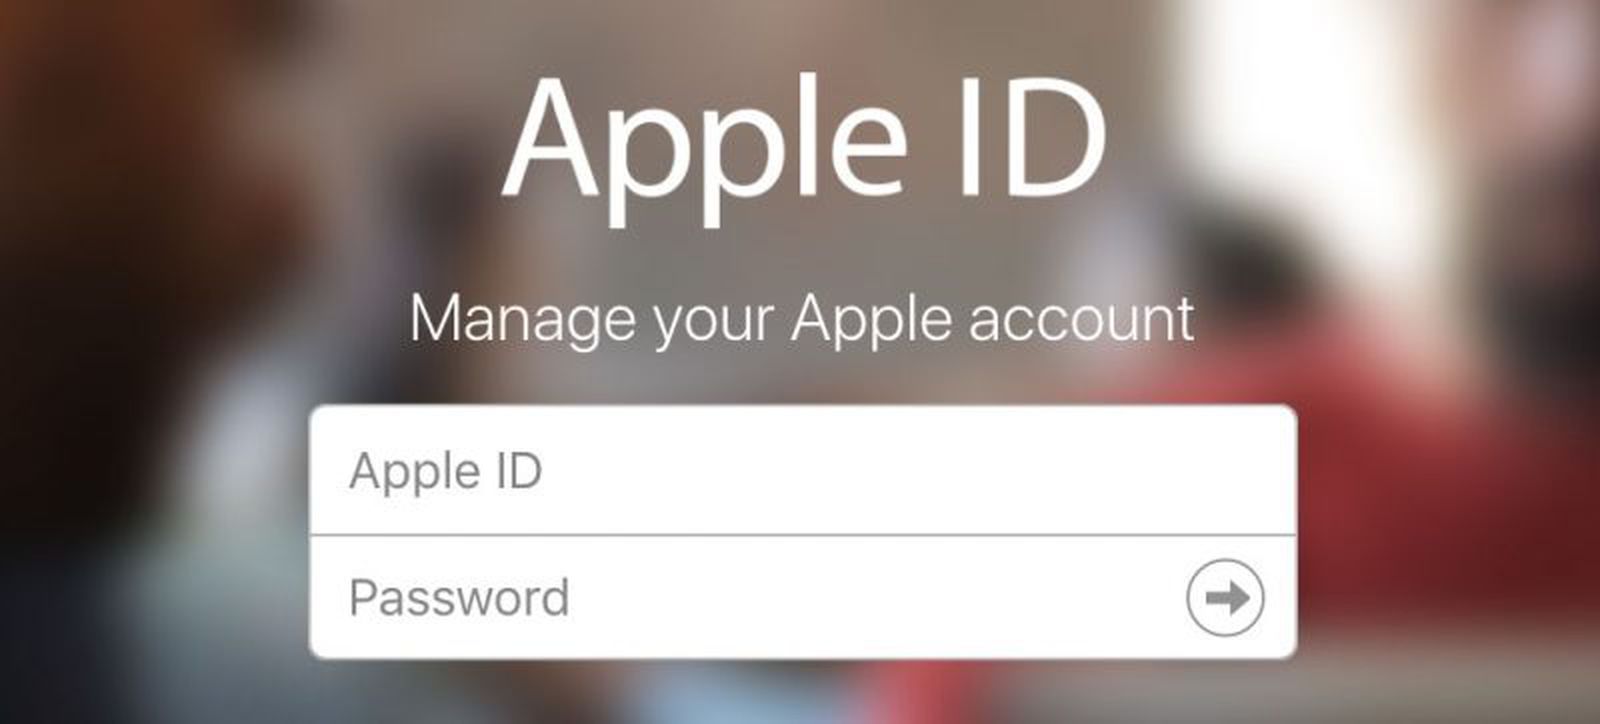 How to Change or Reset Your Apple ID Password